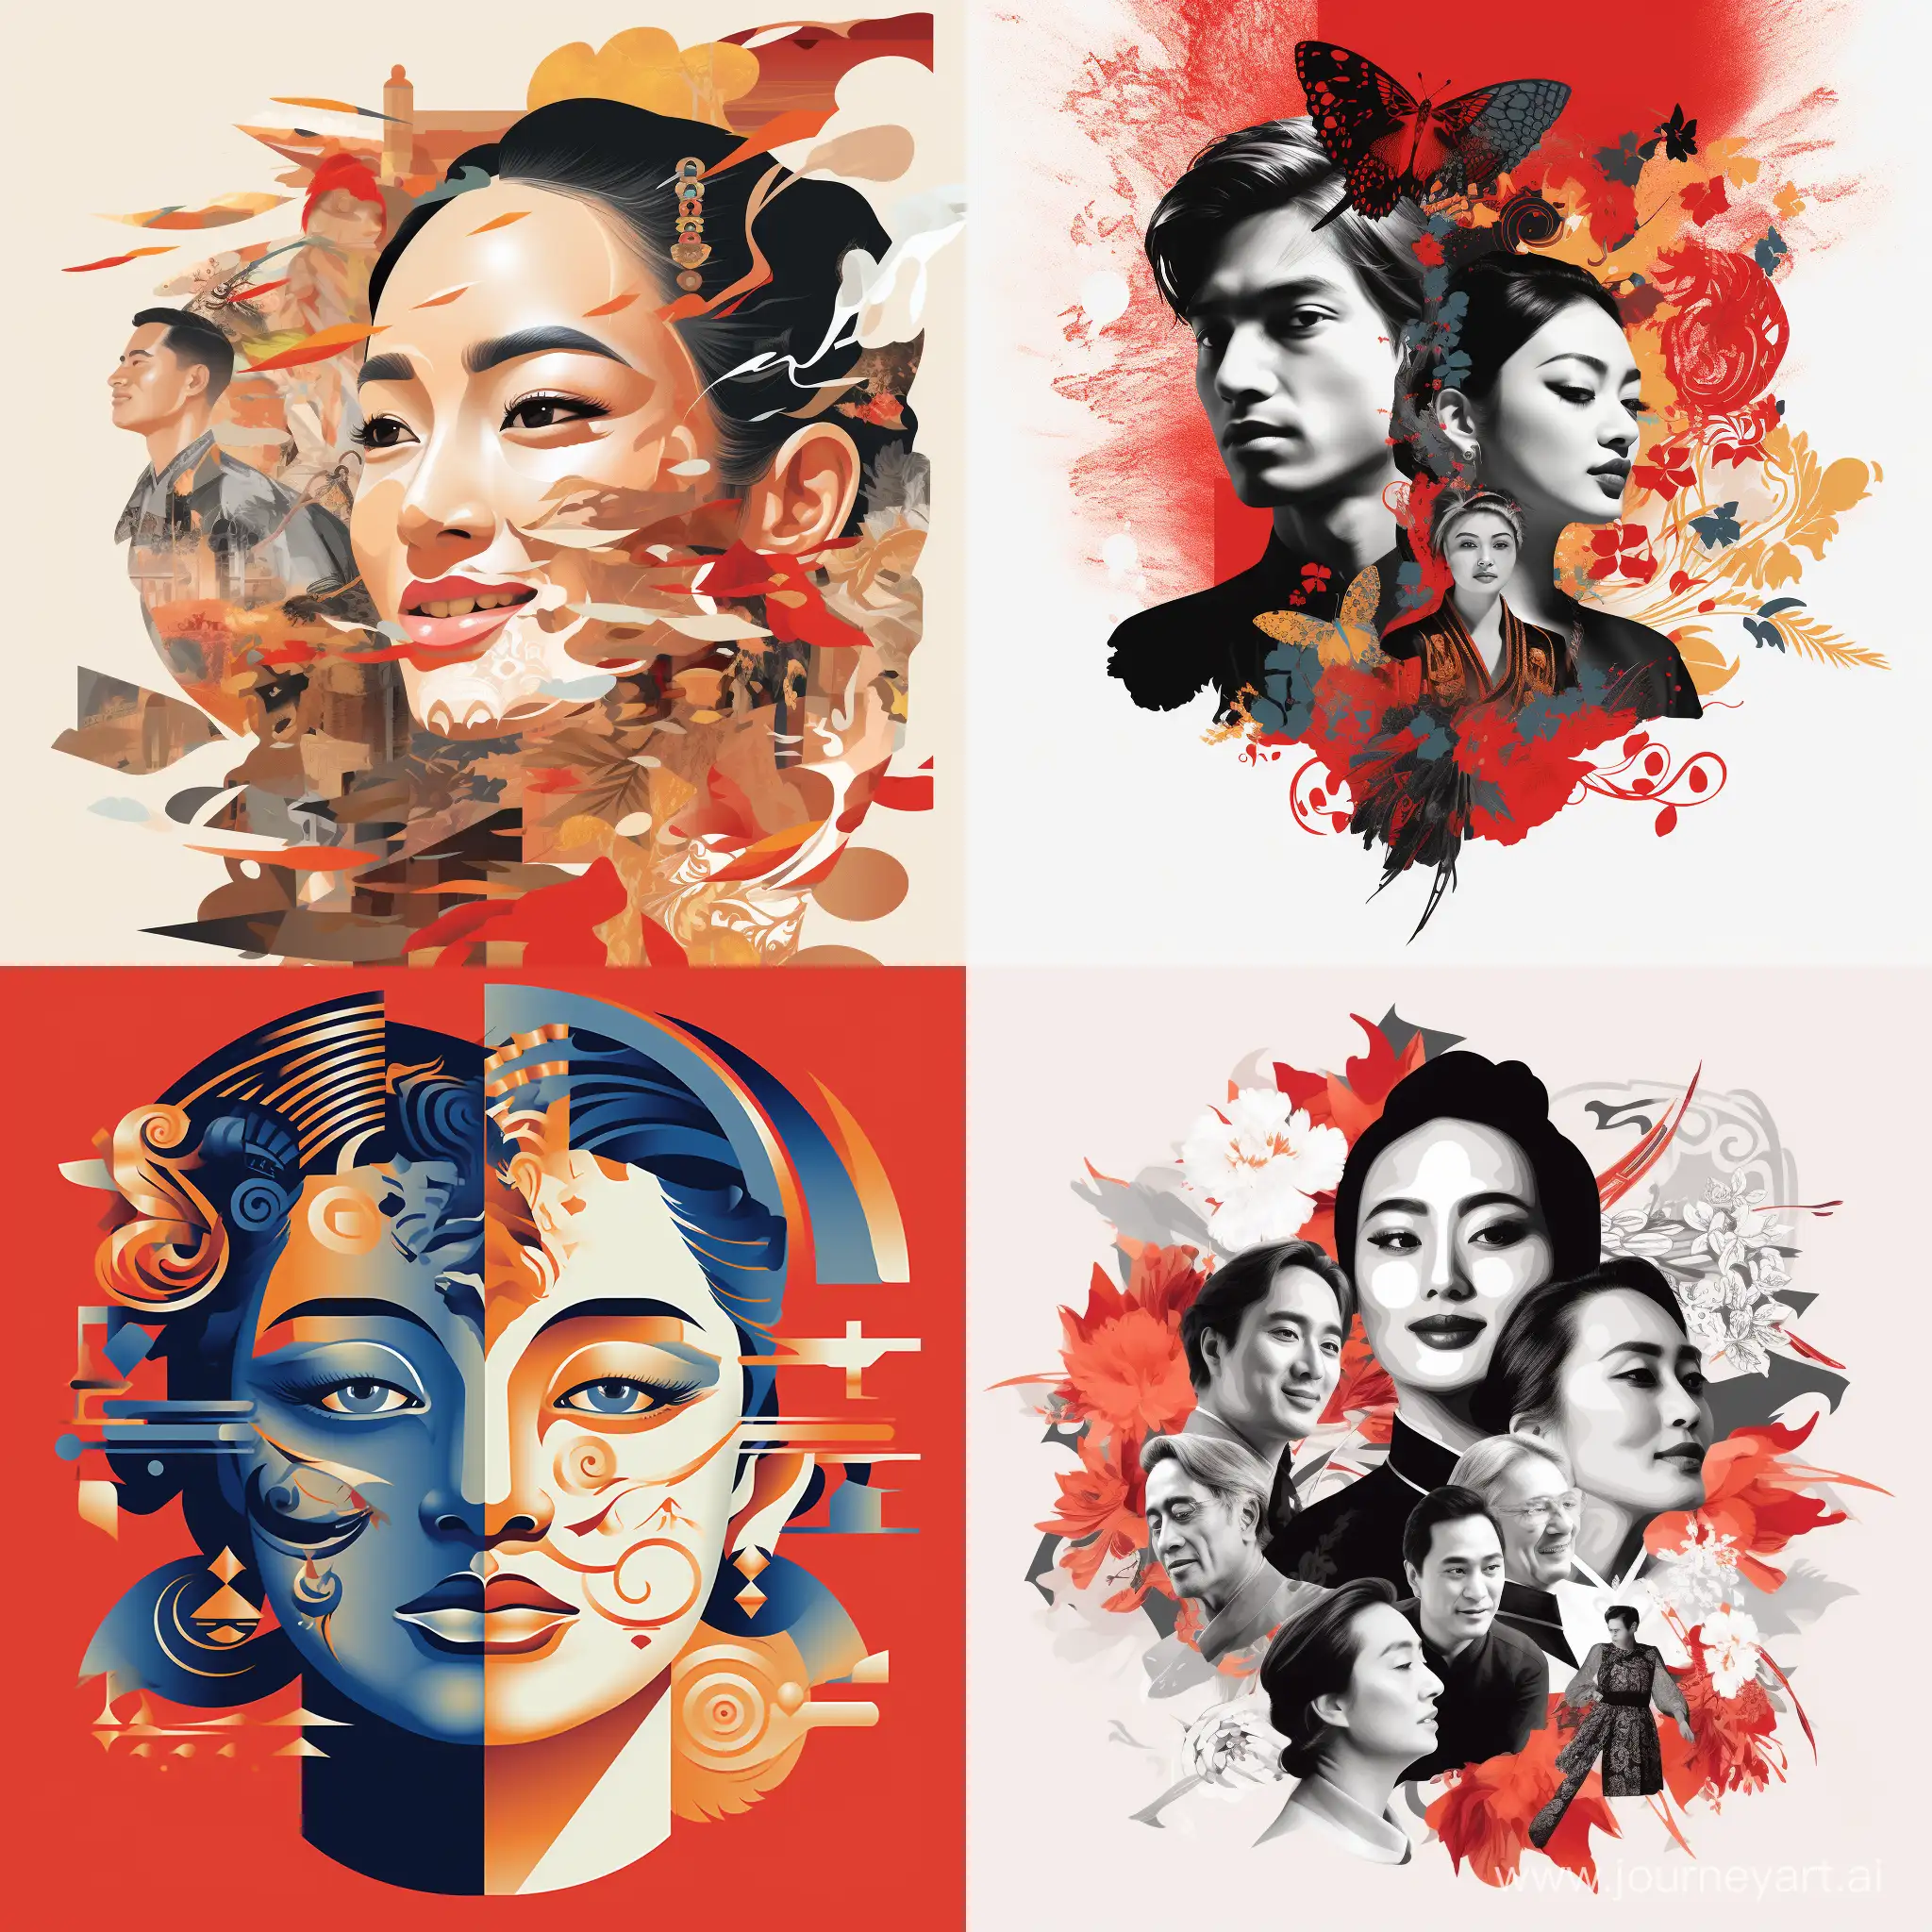 hi-resolution illustration of blend of Indian and Japanese cultures for new year celebrations, negative: dismorphed faces